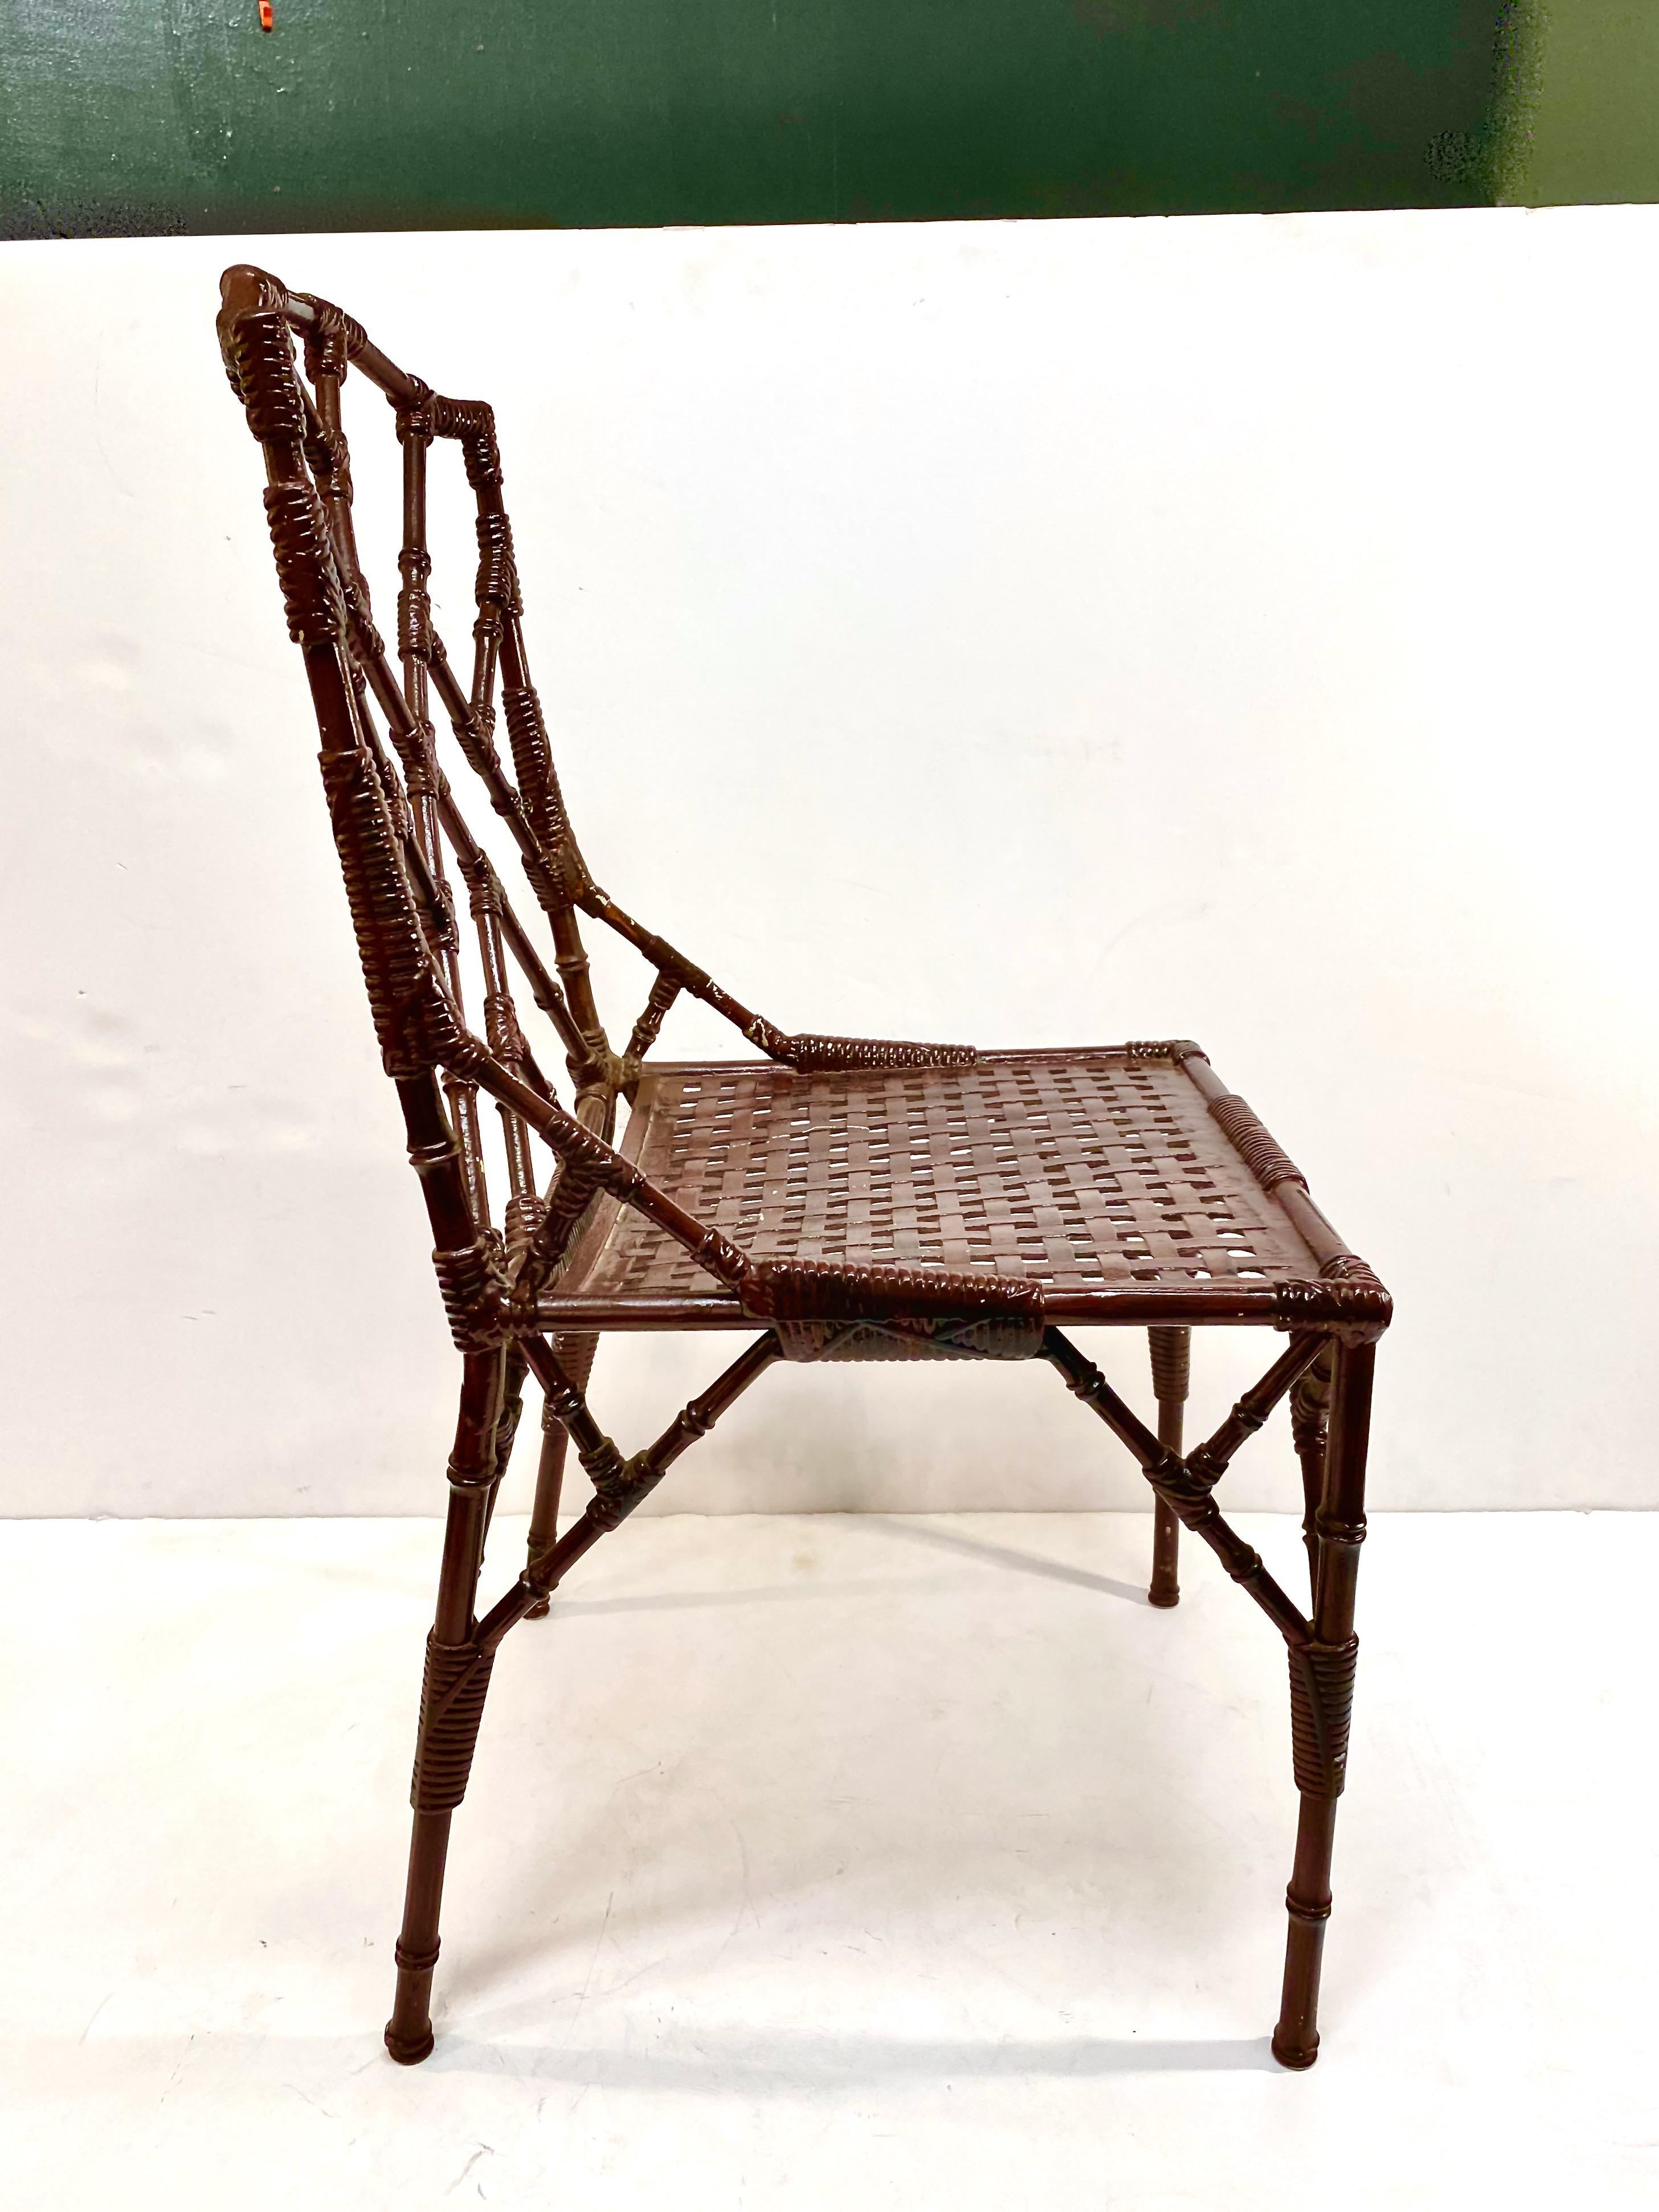 Aluminum Set of Four Faux Bamboo Chairs and Table, c. 1970-1980 For Sale